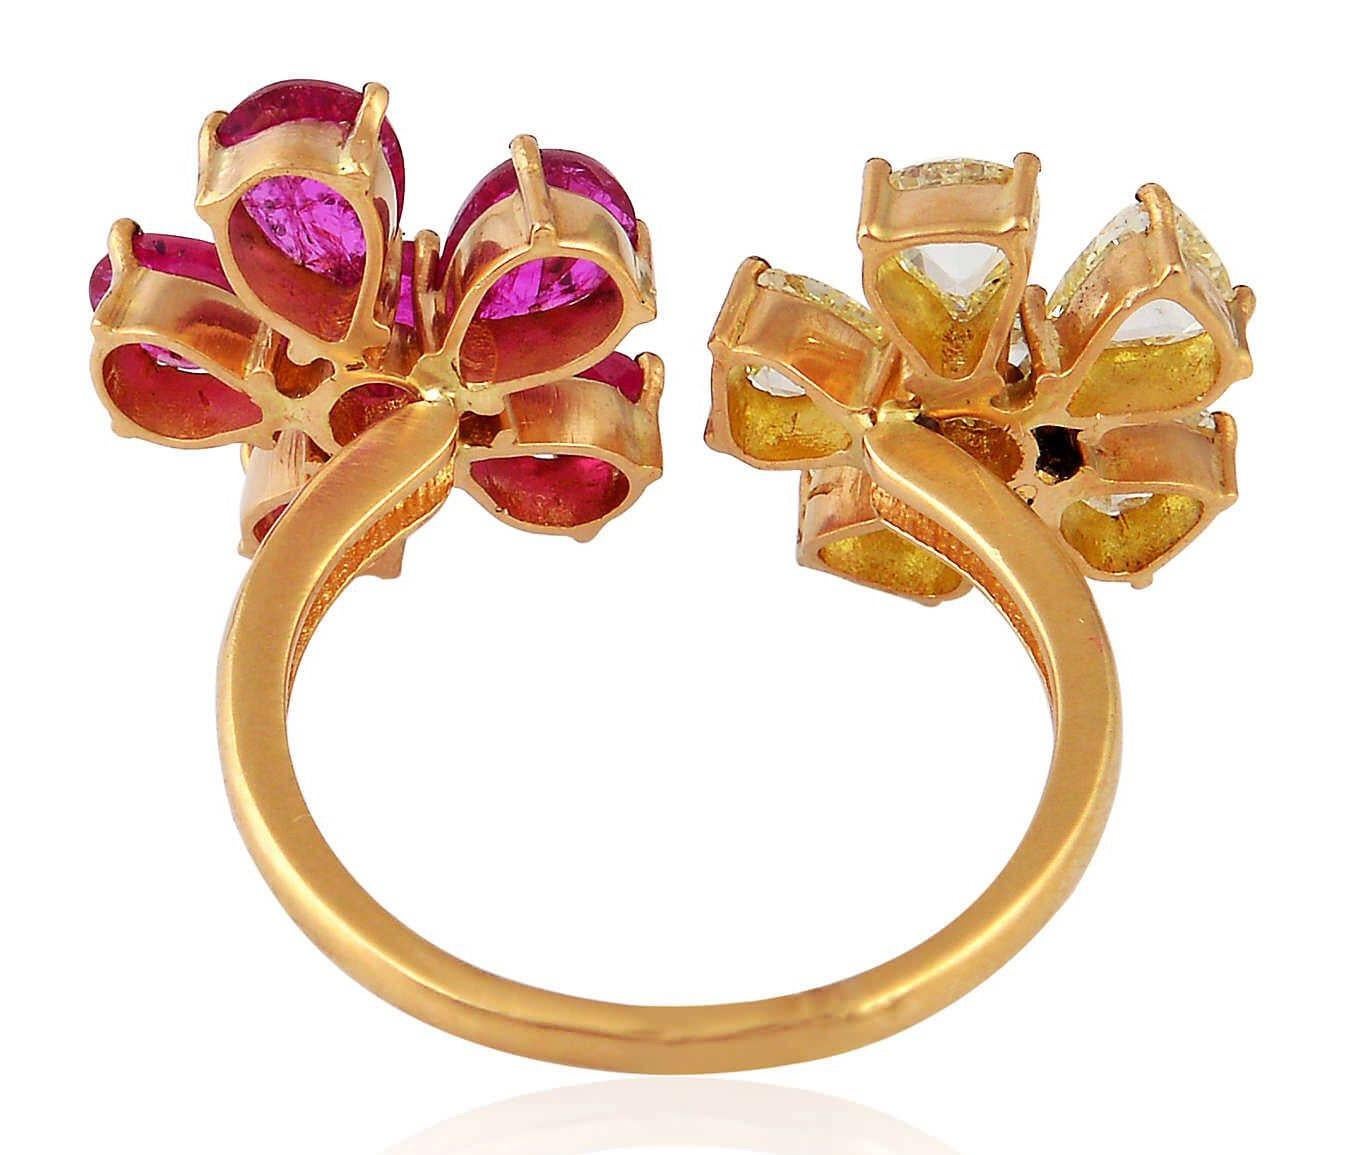 This floral ruby ring has been crafted from 18-karat gold.  It is hand set in 2.42 carats rubies and 1.22 carats diamonds. 

The ring is a size 6.5 and may be resized to larger or smaller upon request. 
FOLLOW  MEGHNA JEWELS storefront to view the